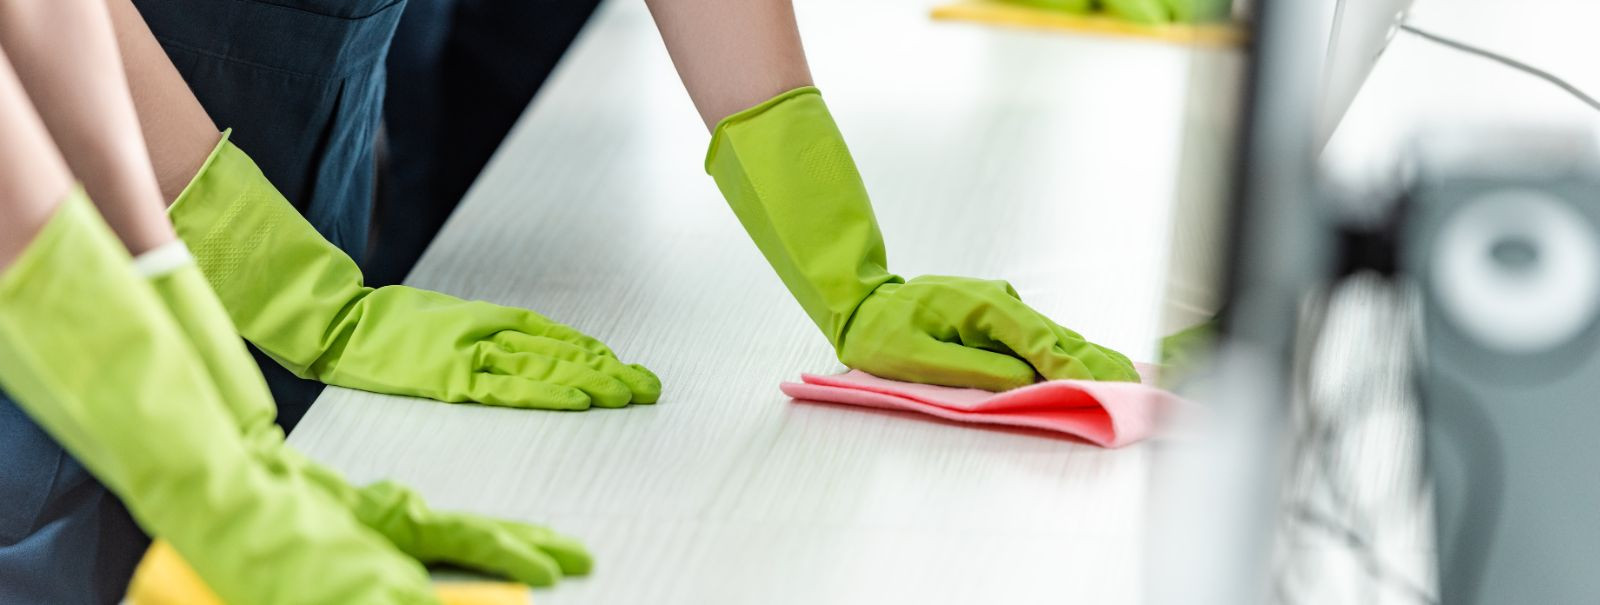 Eco-friendly cleaning refers to the use of cleaning methods and products with environmentally friendly ingredients designed to preserve human health and environ